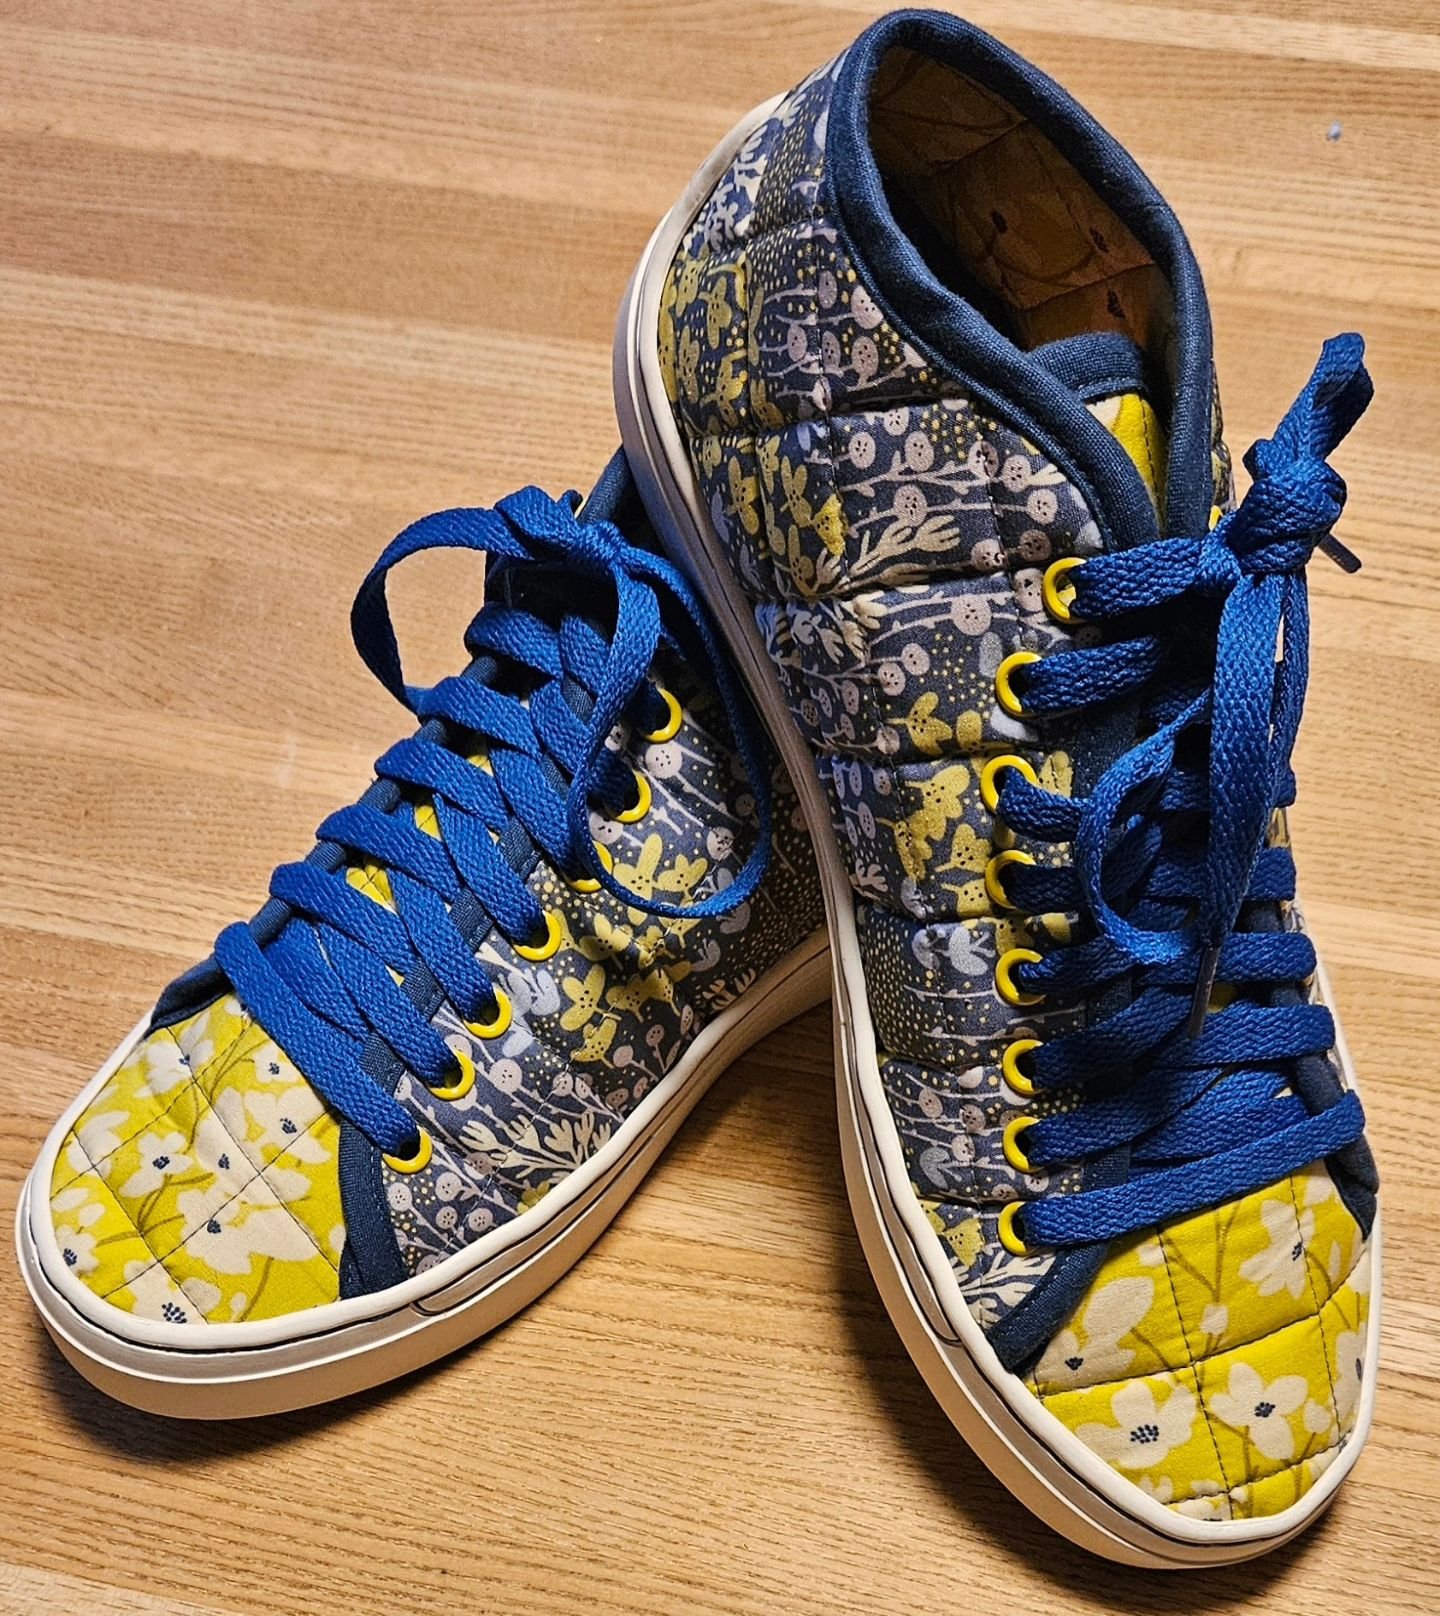 Fresh Linen by @katie_oshea_design for @artgalleryfabrics.
Happy Feet! Quilted Sneakers by Bucklebee. 

Check our Events page for class info.
Sole shipment is just days away.

#sew #quilt #sewsewsew #quiltylove #sewingfun #sewingclass #imadethis #mak